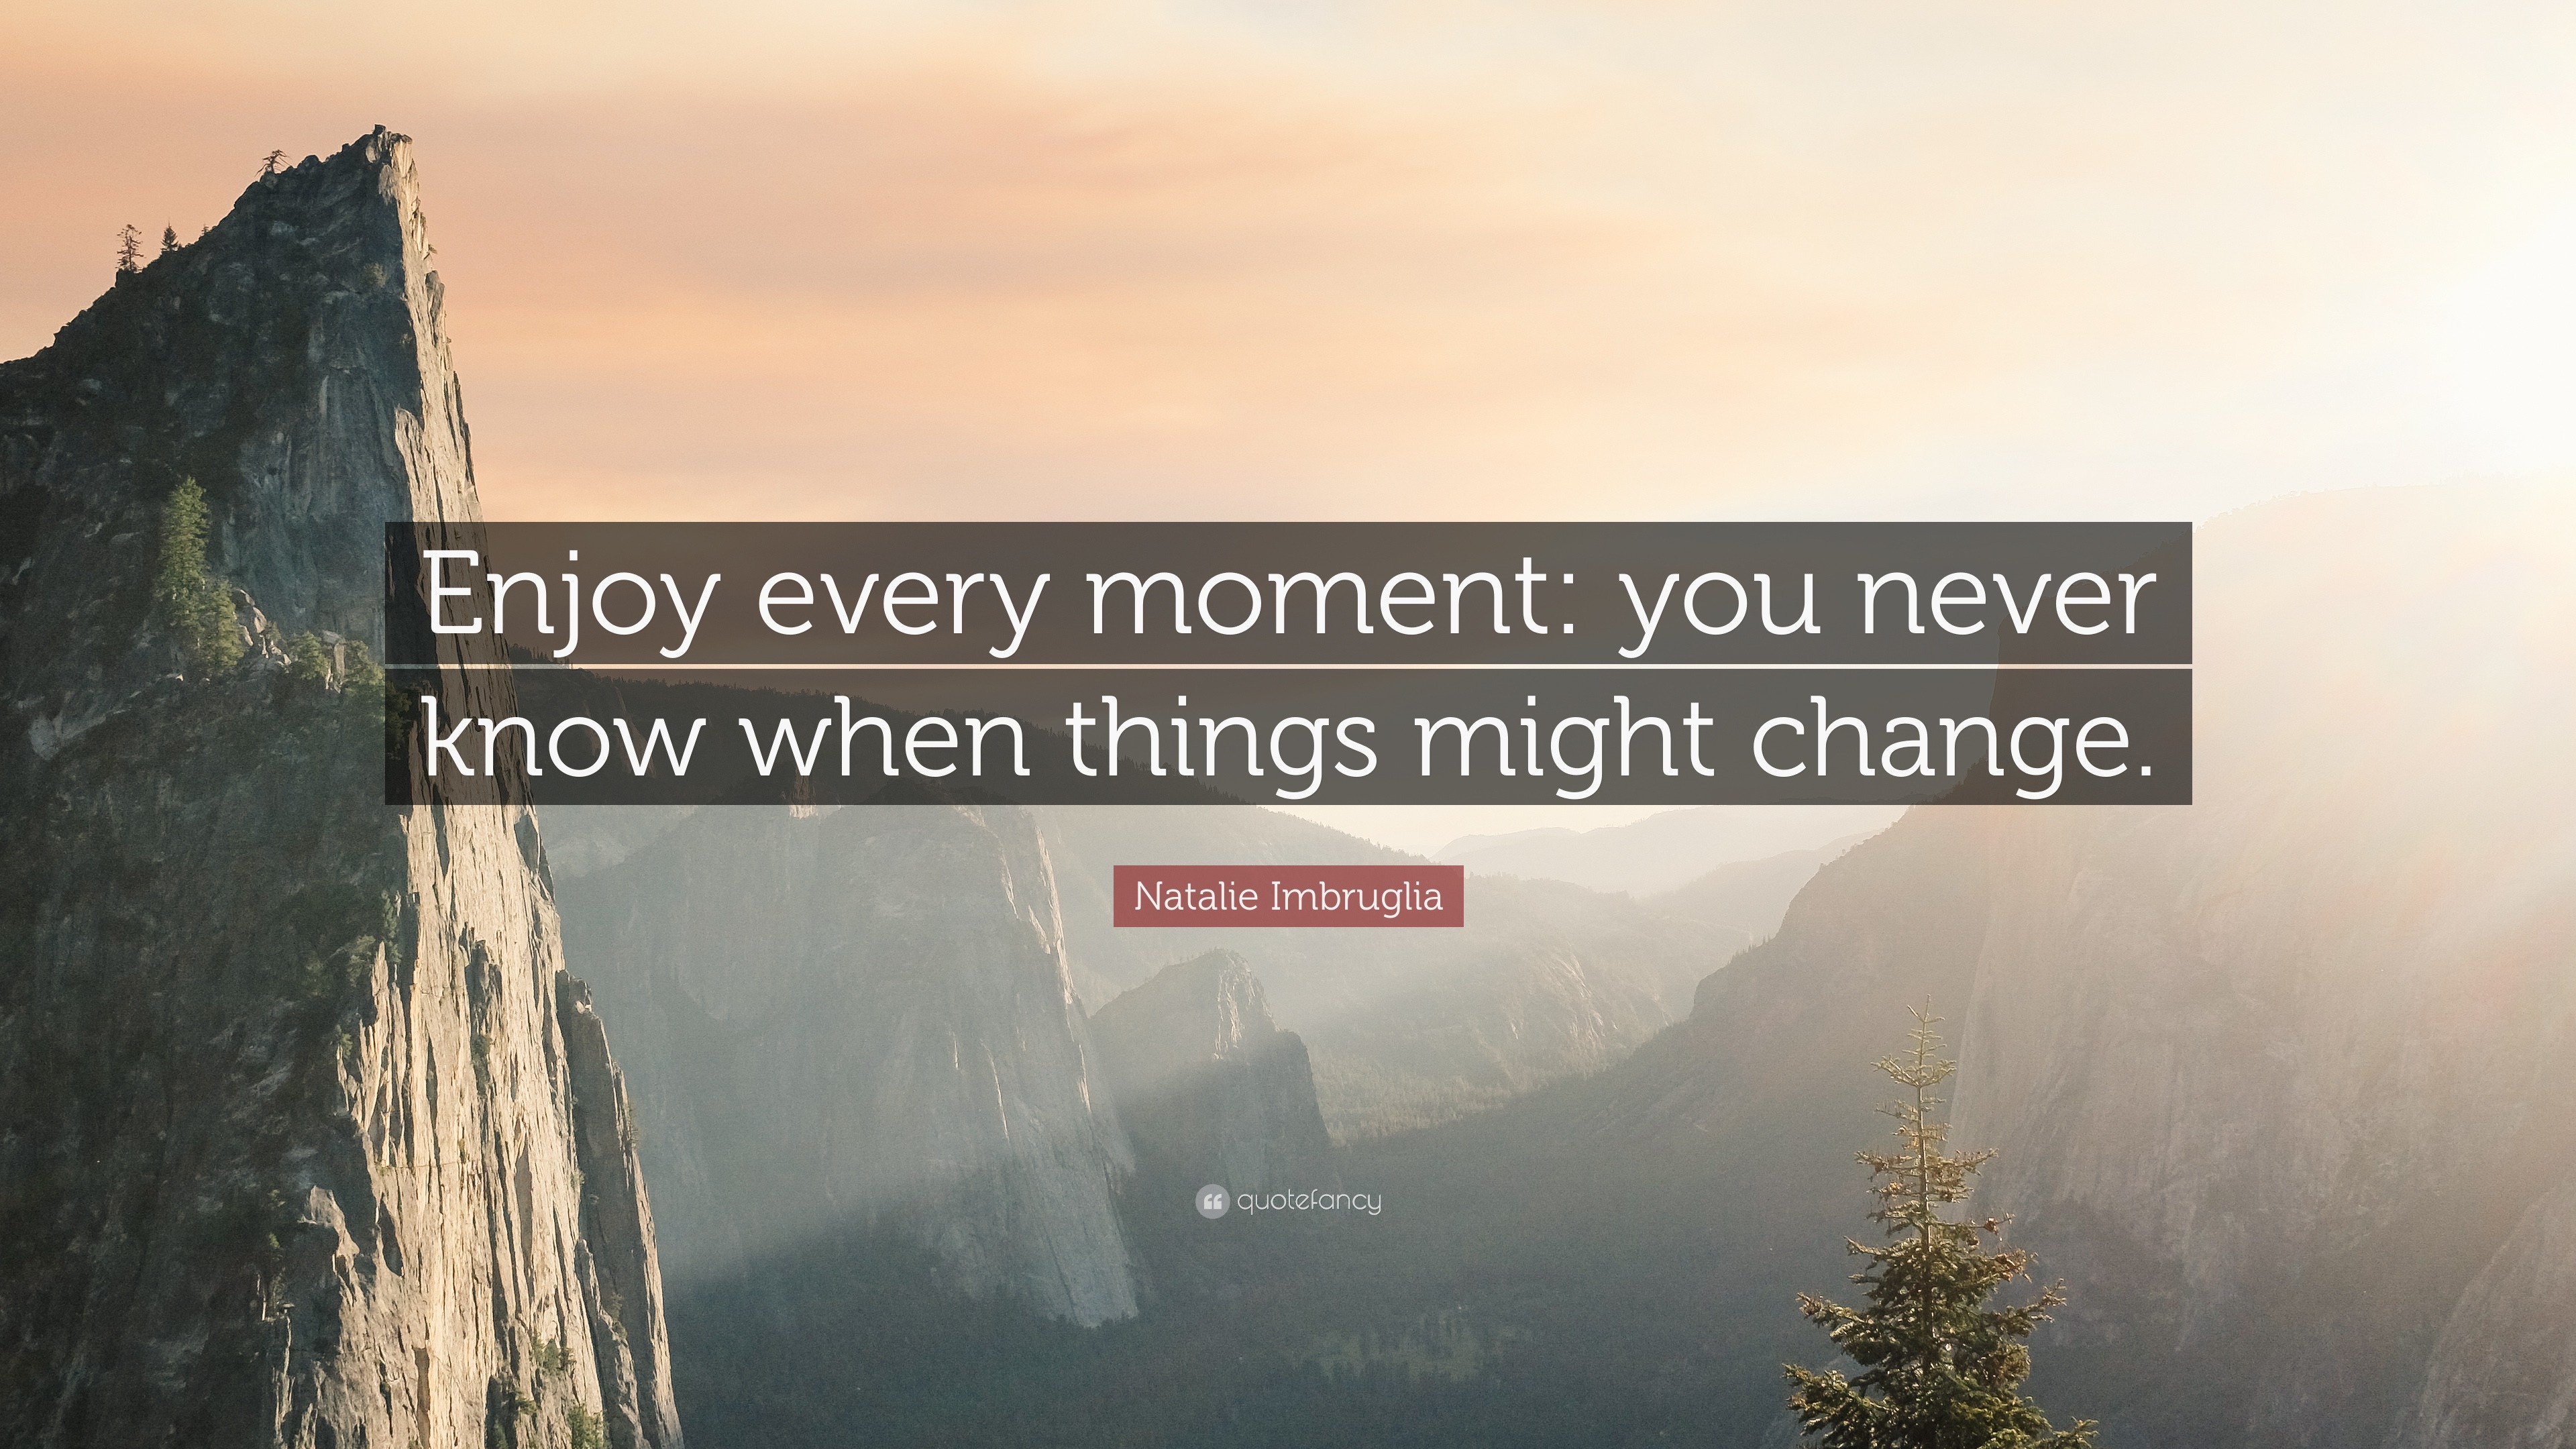 Natalie Imbruglia Quote: “Enjoy every moment: you never know when things  might change.”